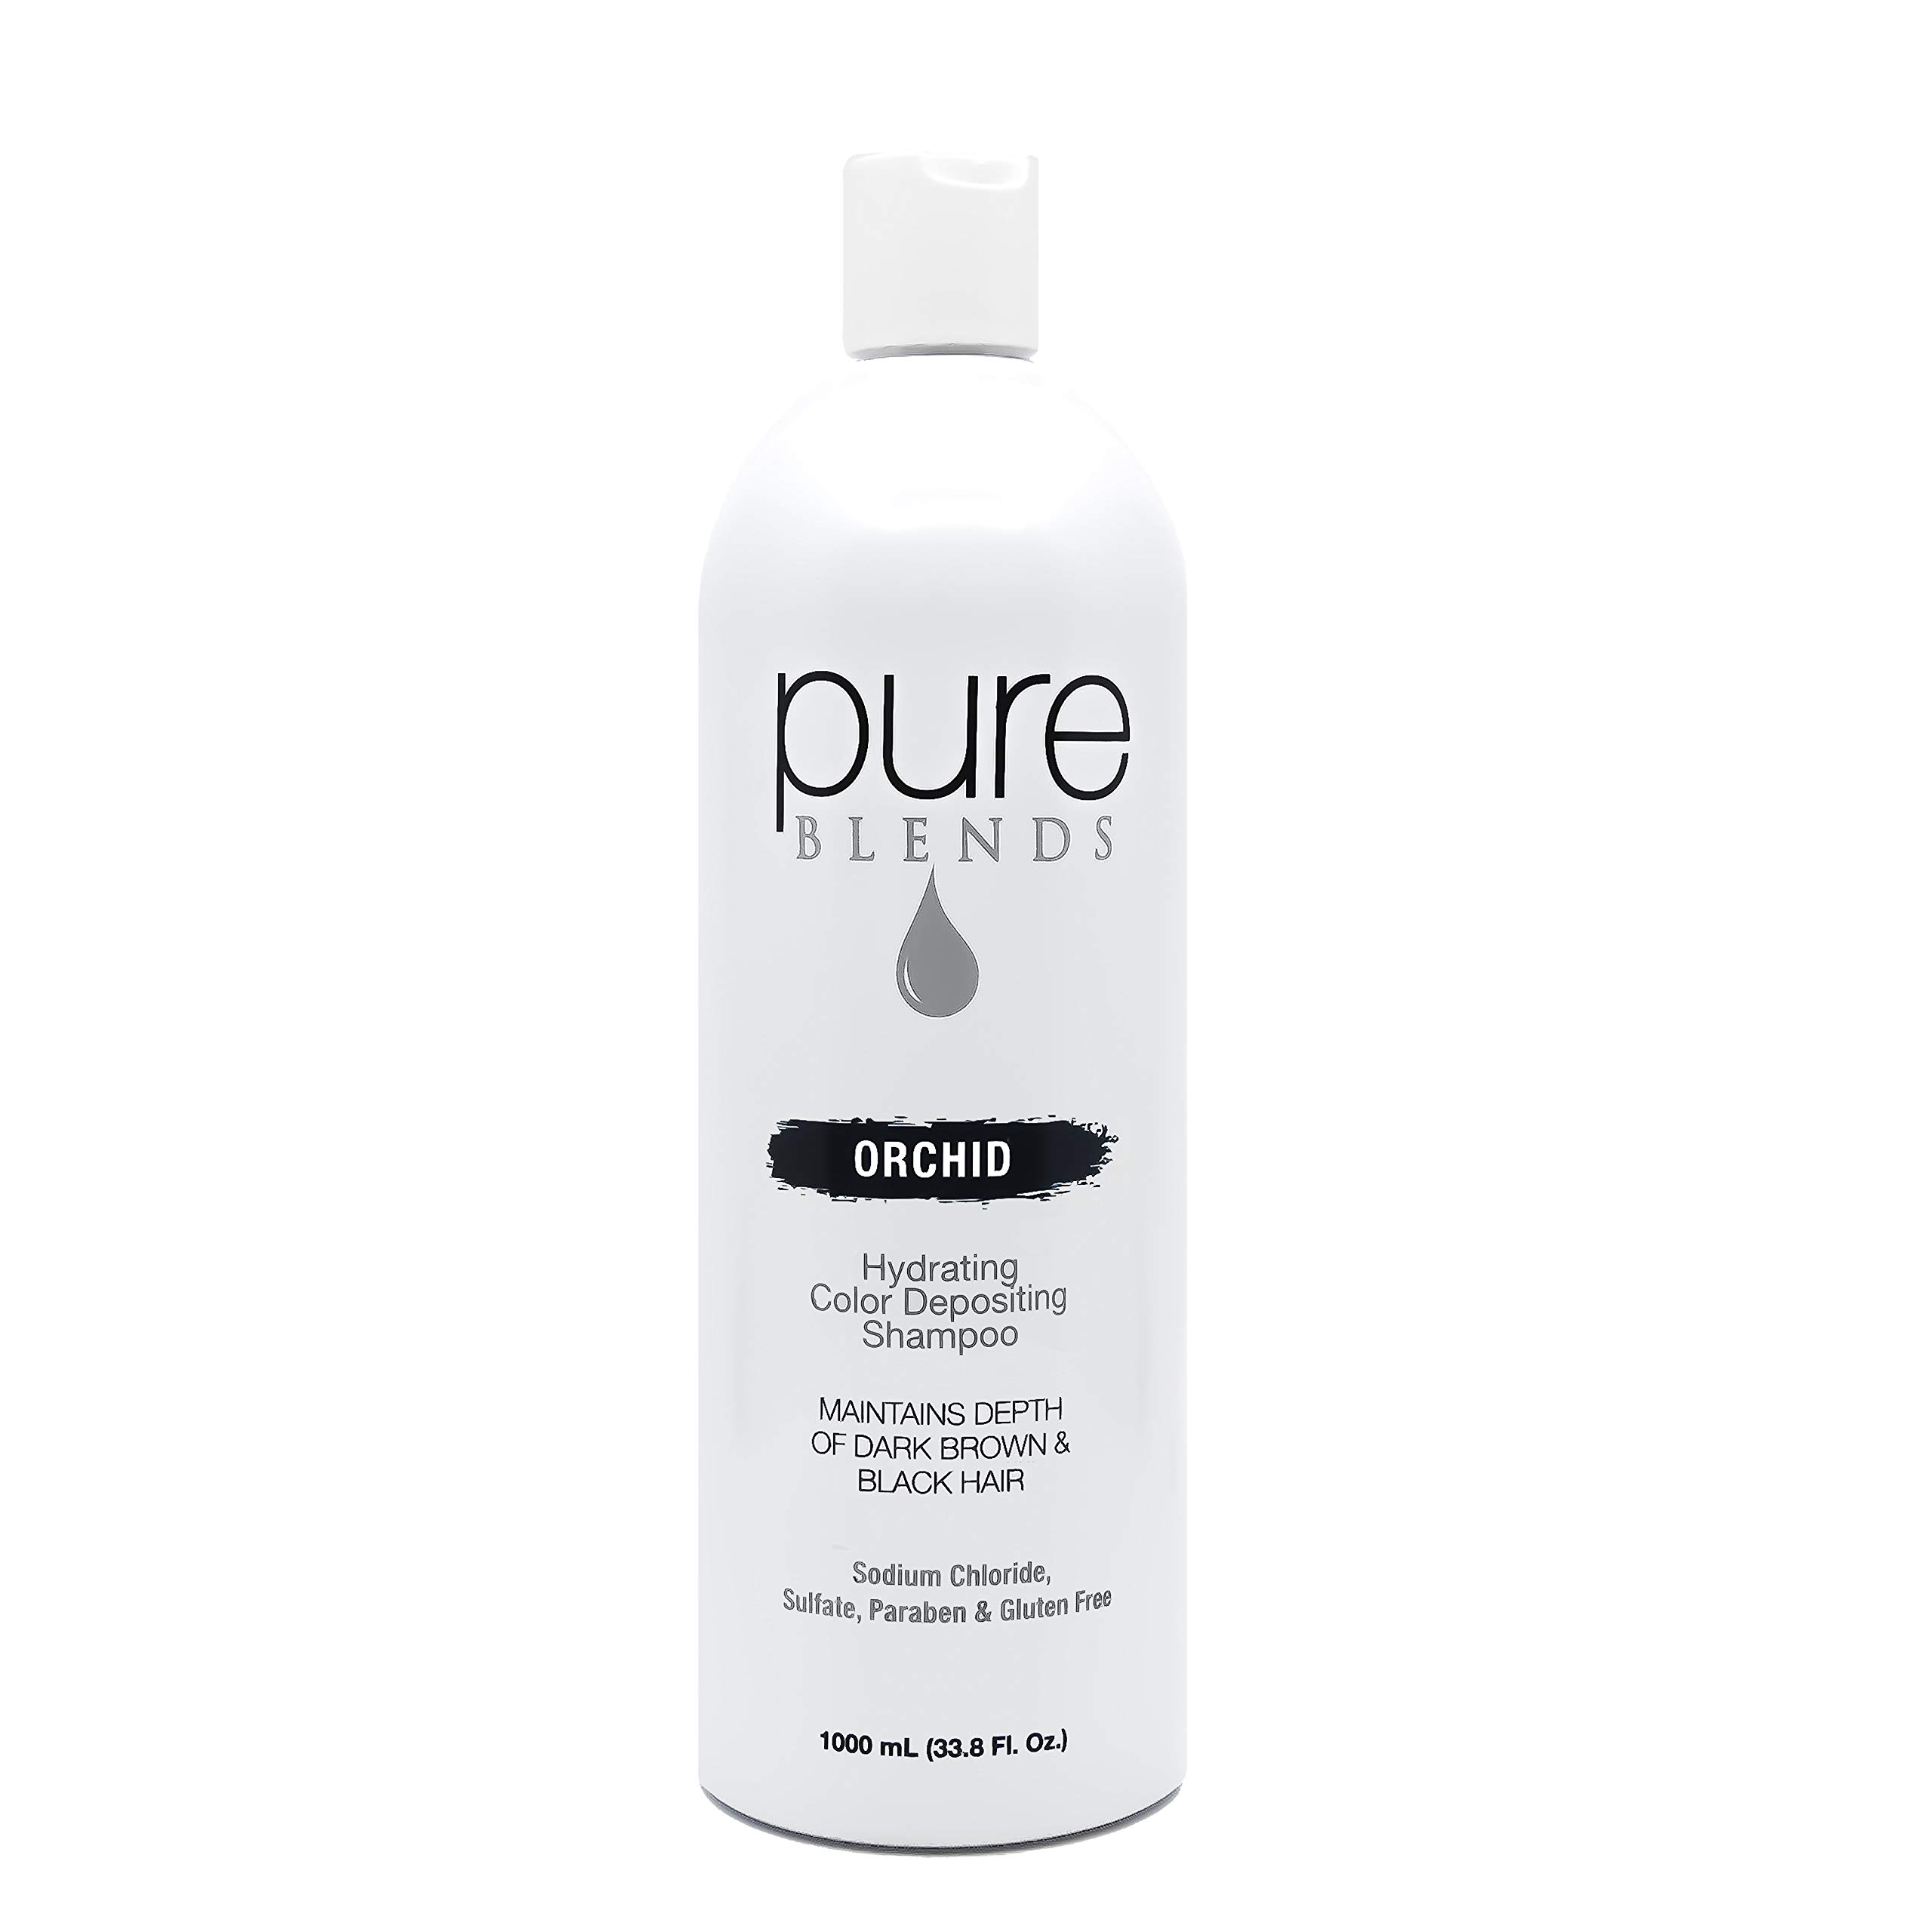 Pure Blends Orchid Hydrating Color Depositing Shampoo, 33.8oz - Infused with Keratin & Collagen to Repair Dry & Damaged Hair - Eliminates Color Fad...